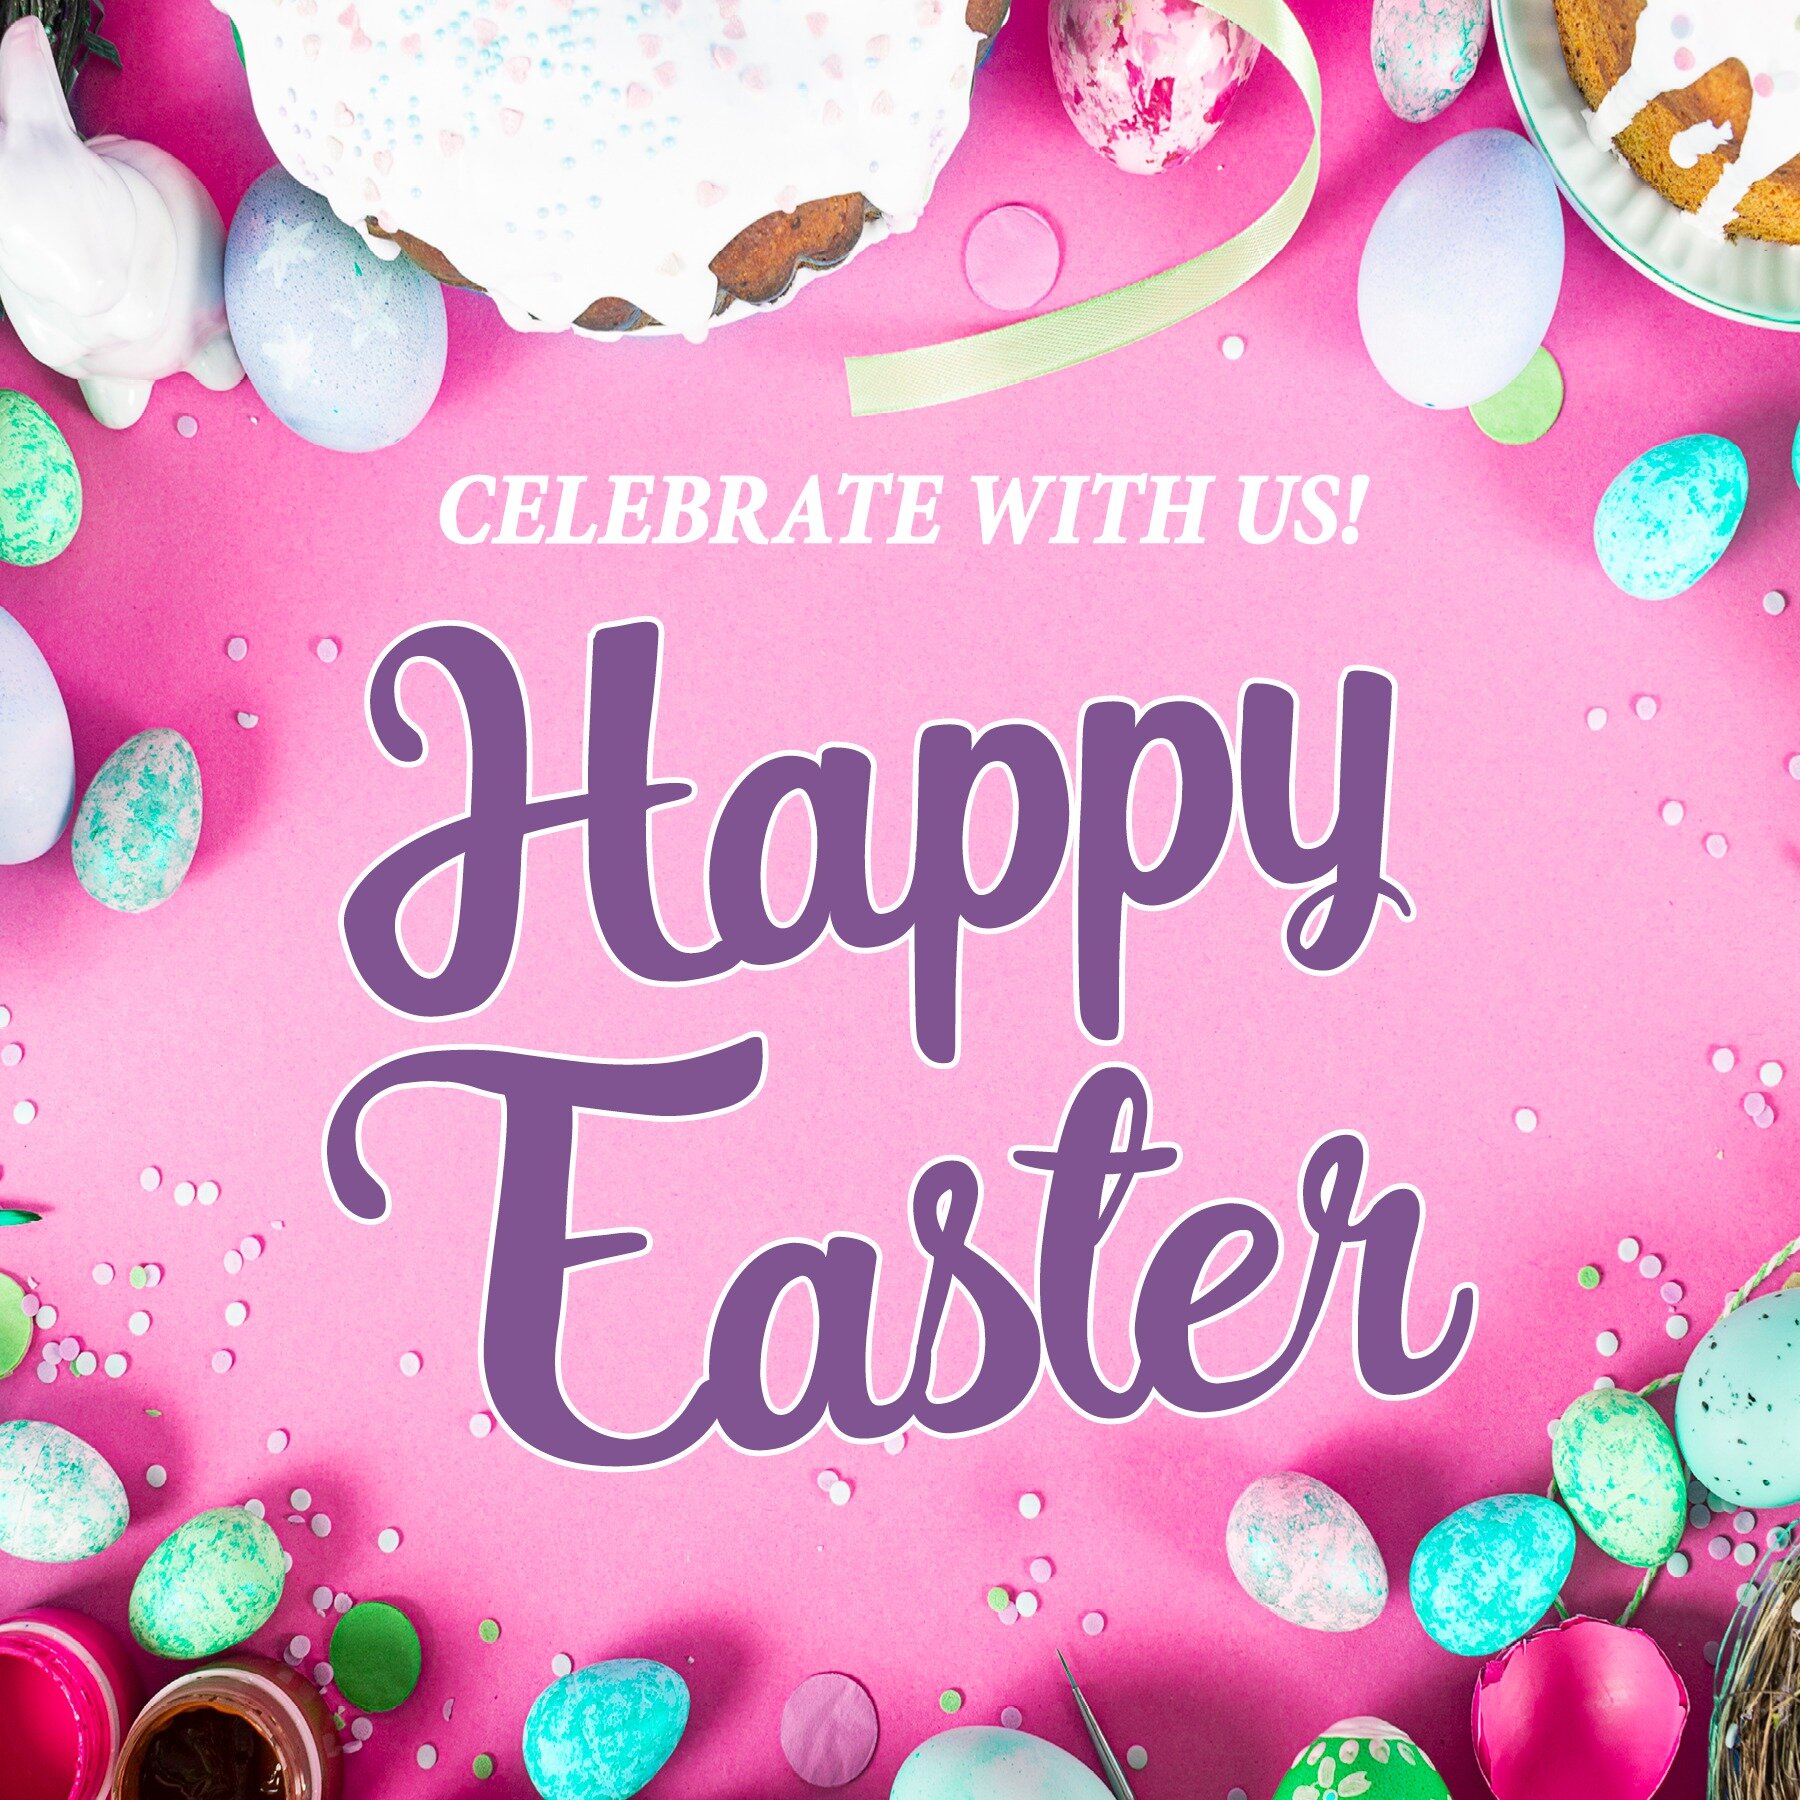 🐰 Celebrate Easter with us this Sunday and enjoy our special brunch buffet! 🐣
.
BUFFET MENU INCLUDES:
Assorted Salads, Fresh Baked Goods, Scrambled Eggs, Assorted Eggs Benny, Baked Ham, Roast Beef, French Toast (strawberry compote &amp; whipped cre